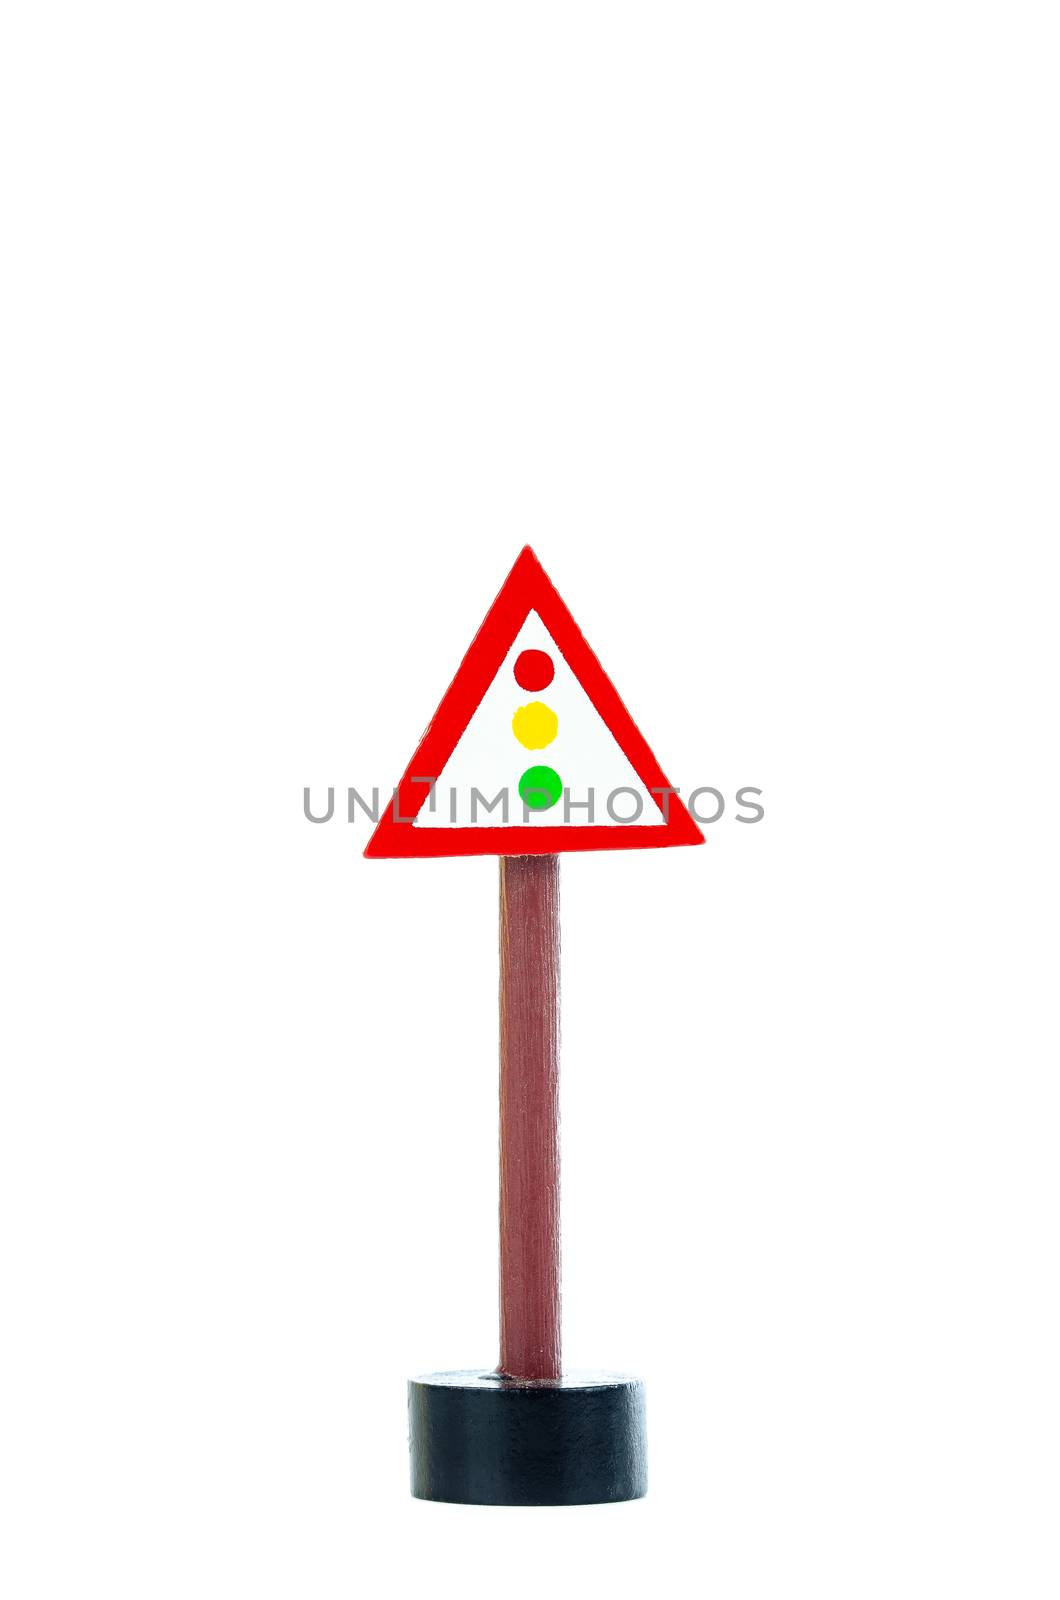 traffic light  sign isolated on white background with copy space for text